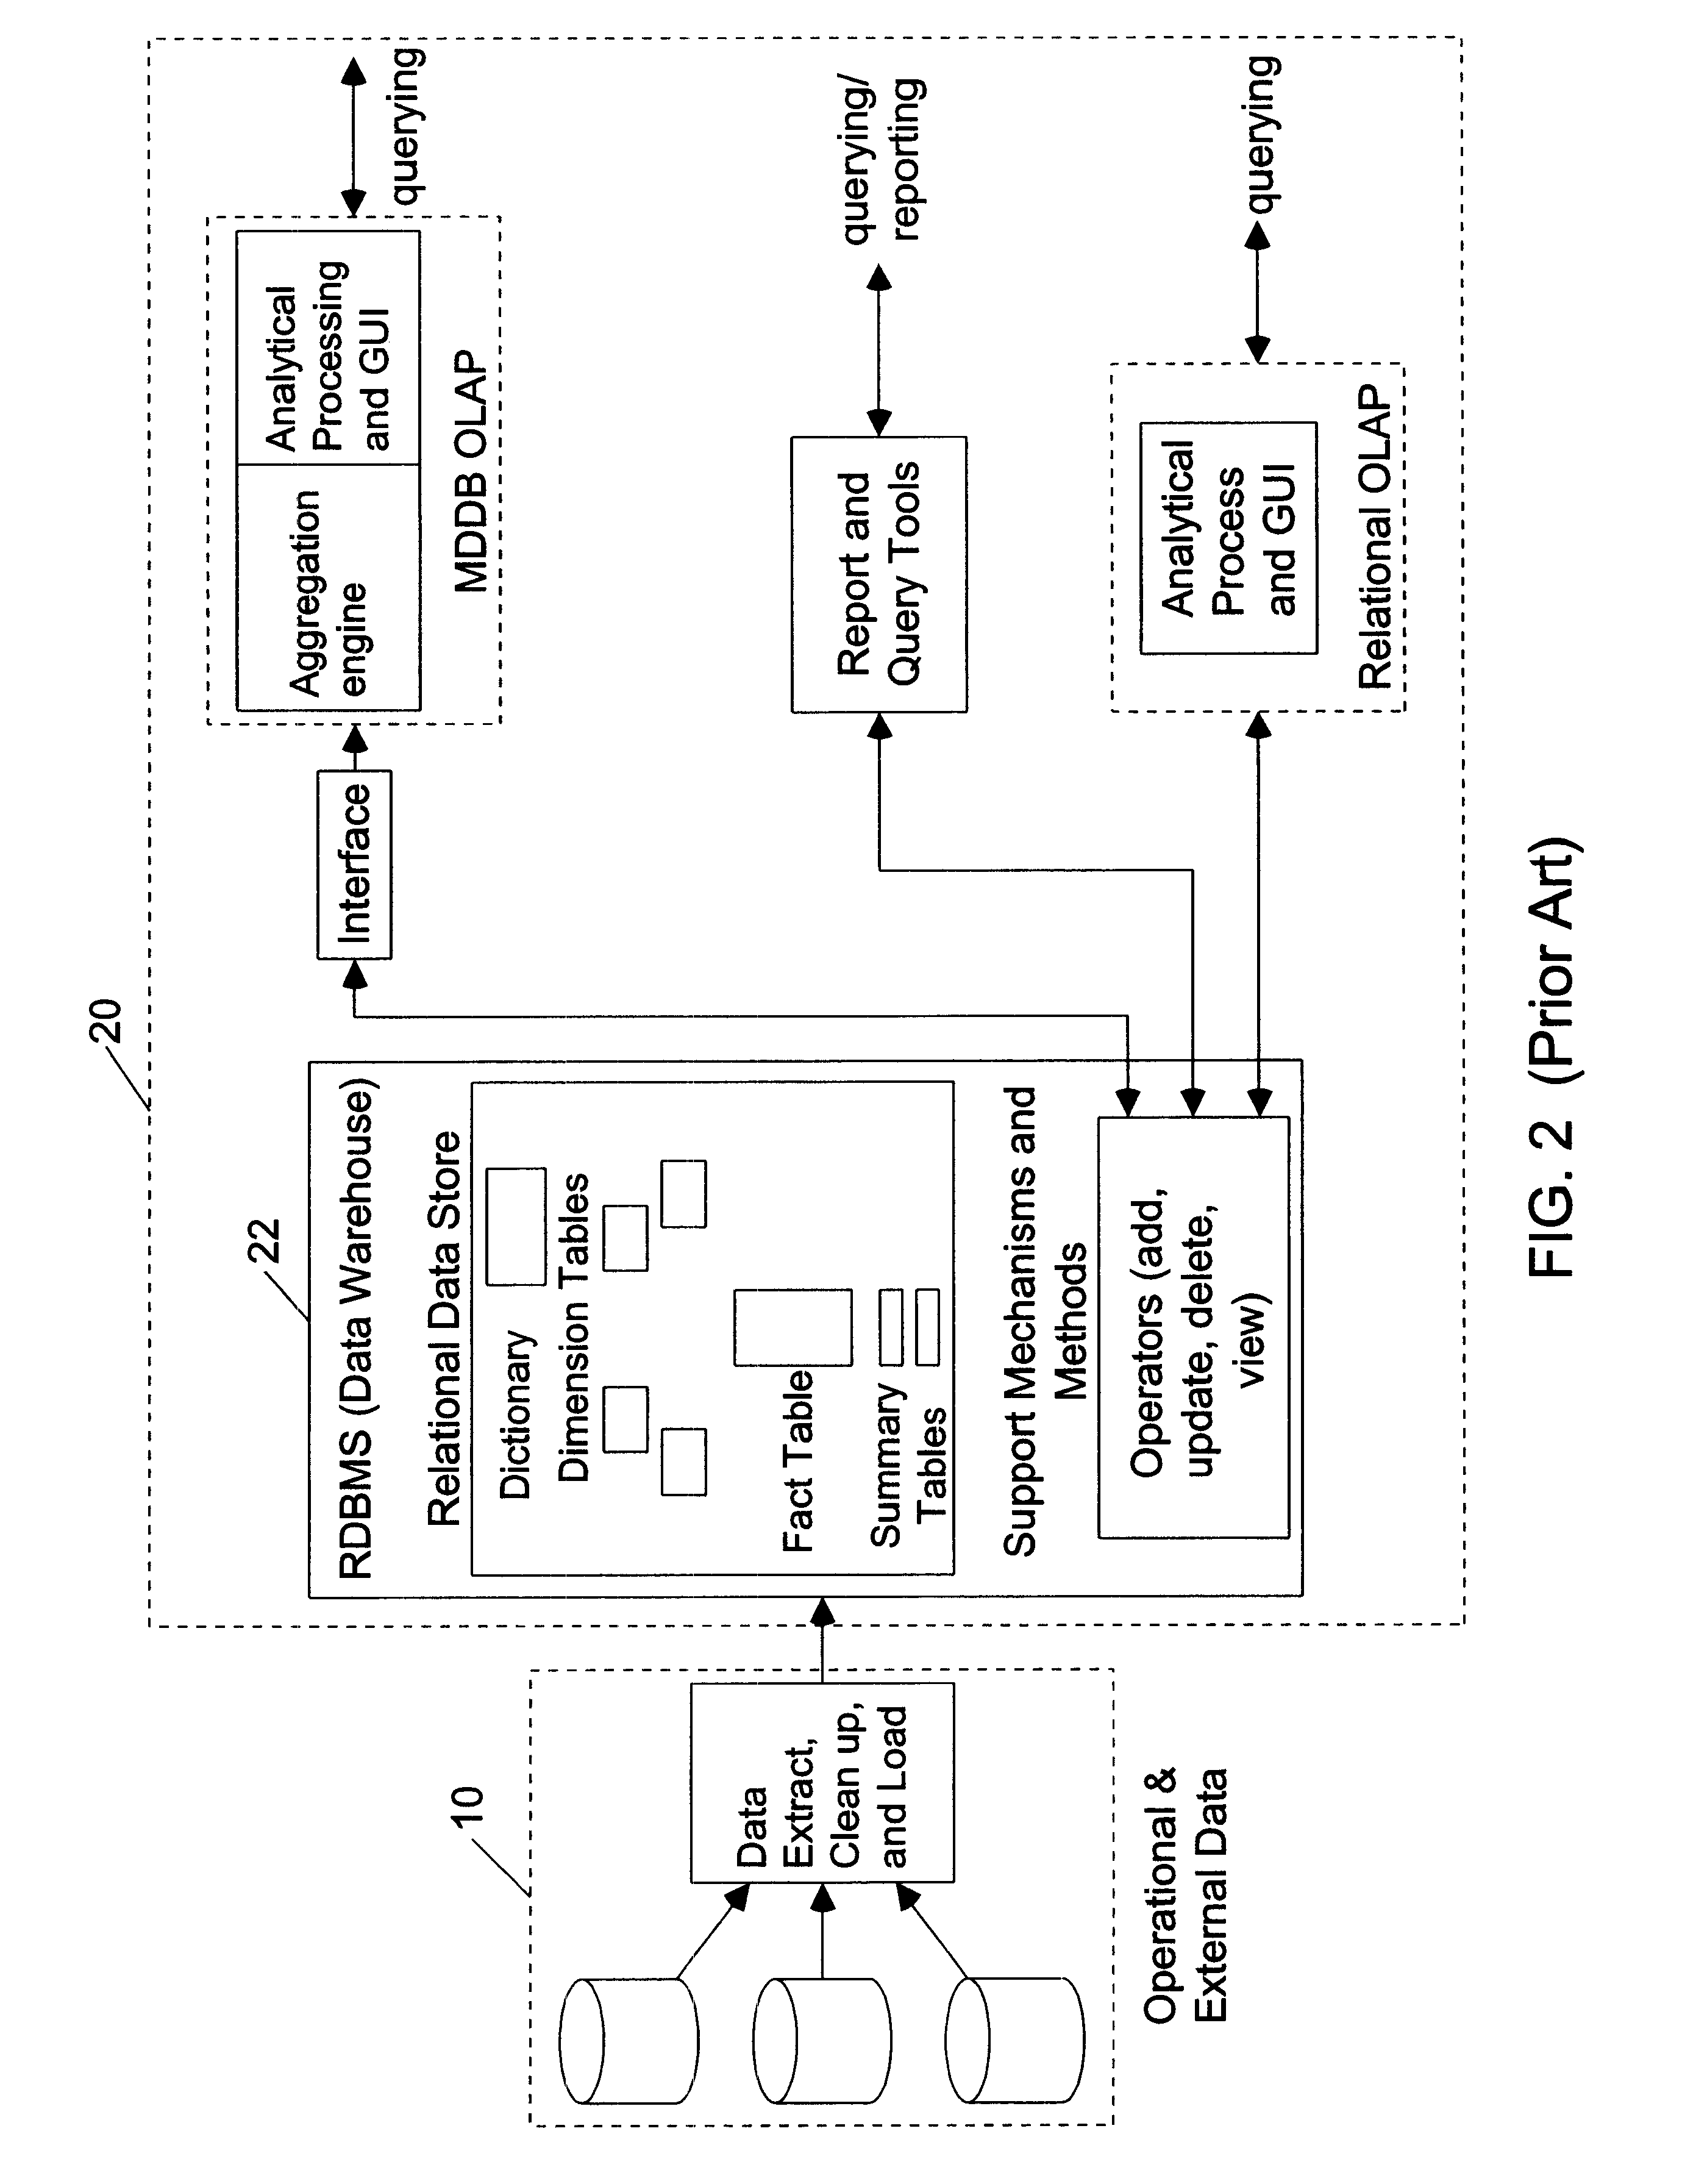 Relational database management system having integrated non-relational multi-dimensional data store of aggregated data elements